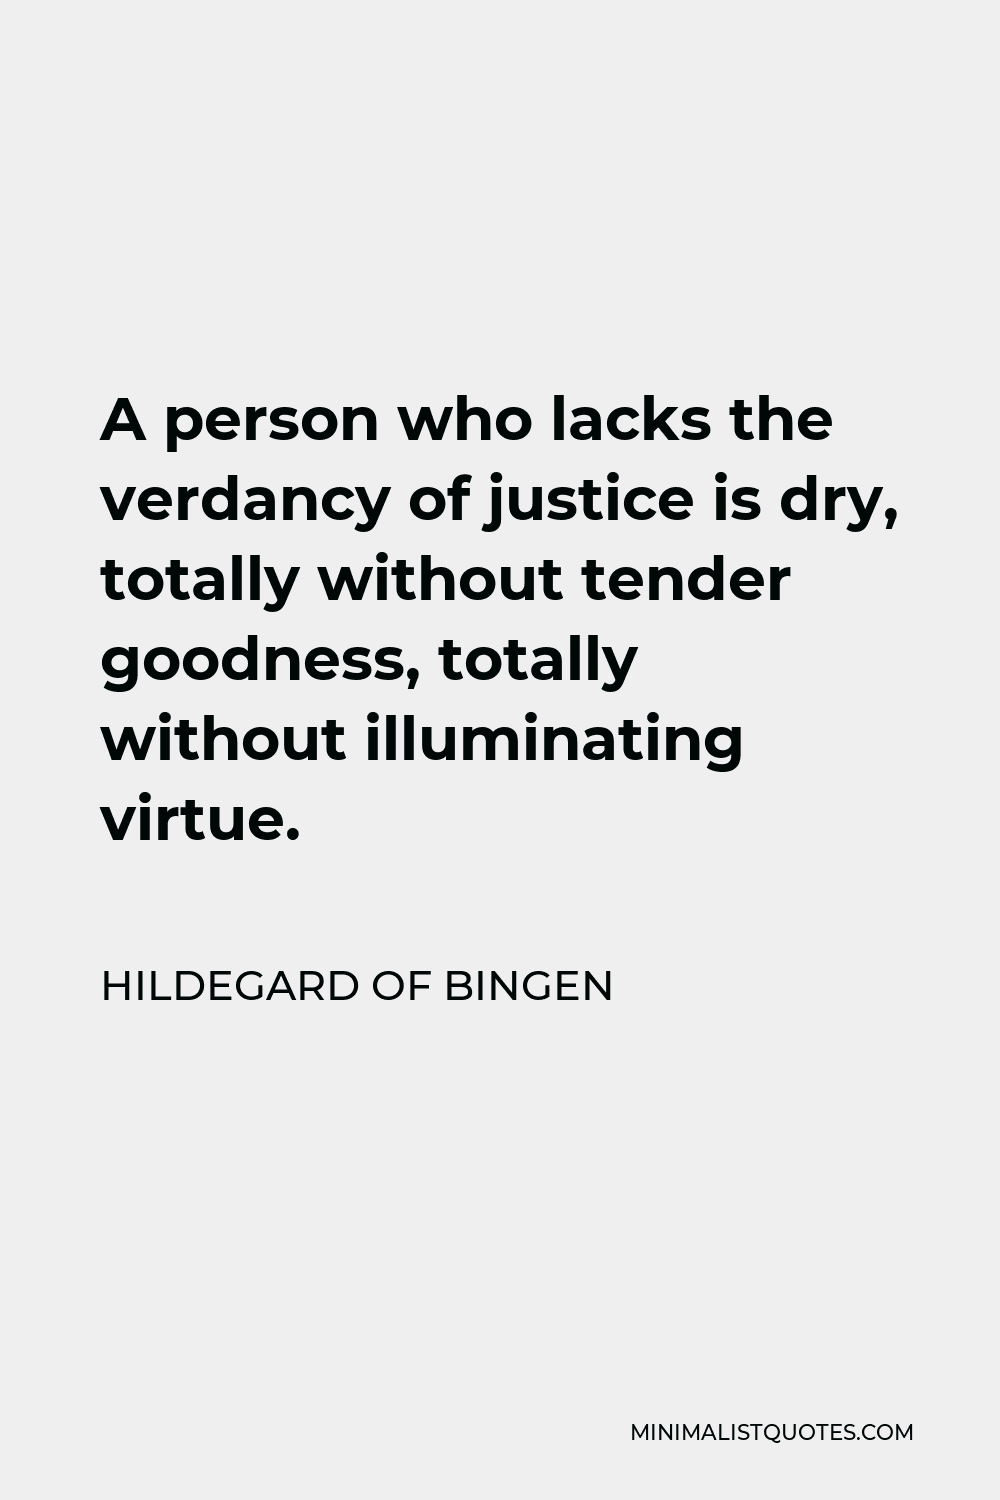 Hildegard of Bingen Quote - A person who lacks the verdancy of justice is dry, totally without tender goodness, totally without illuminating virtue.